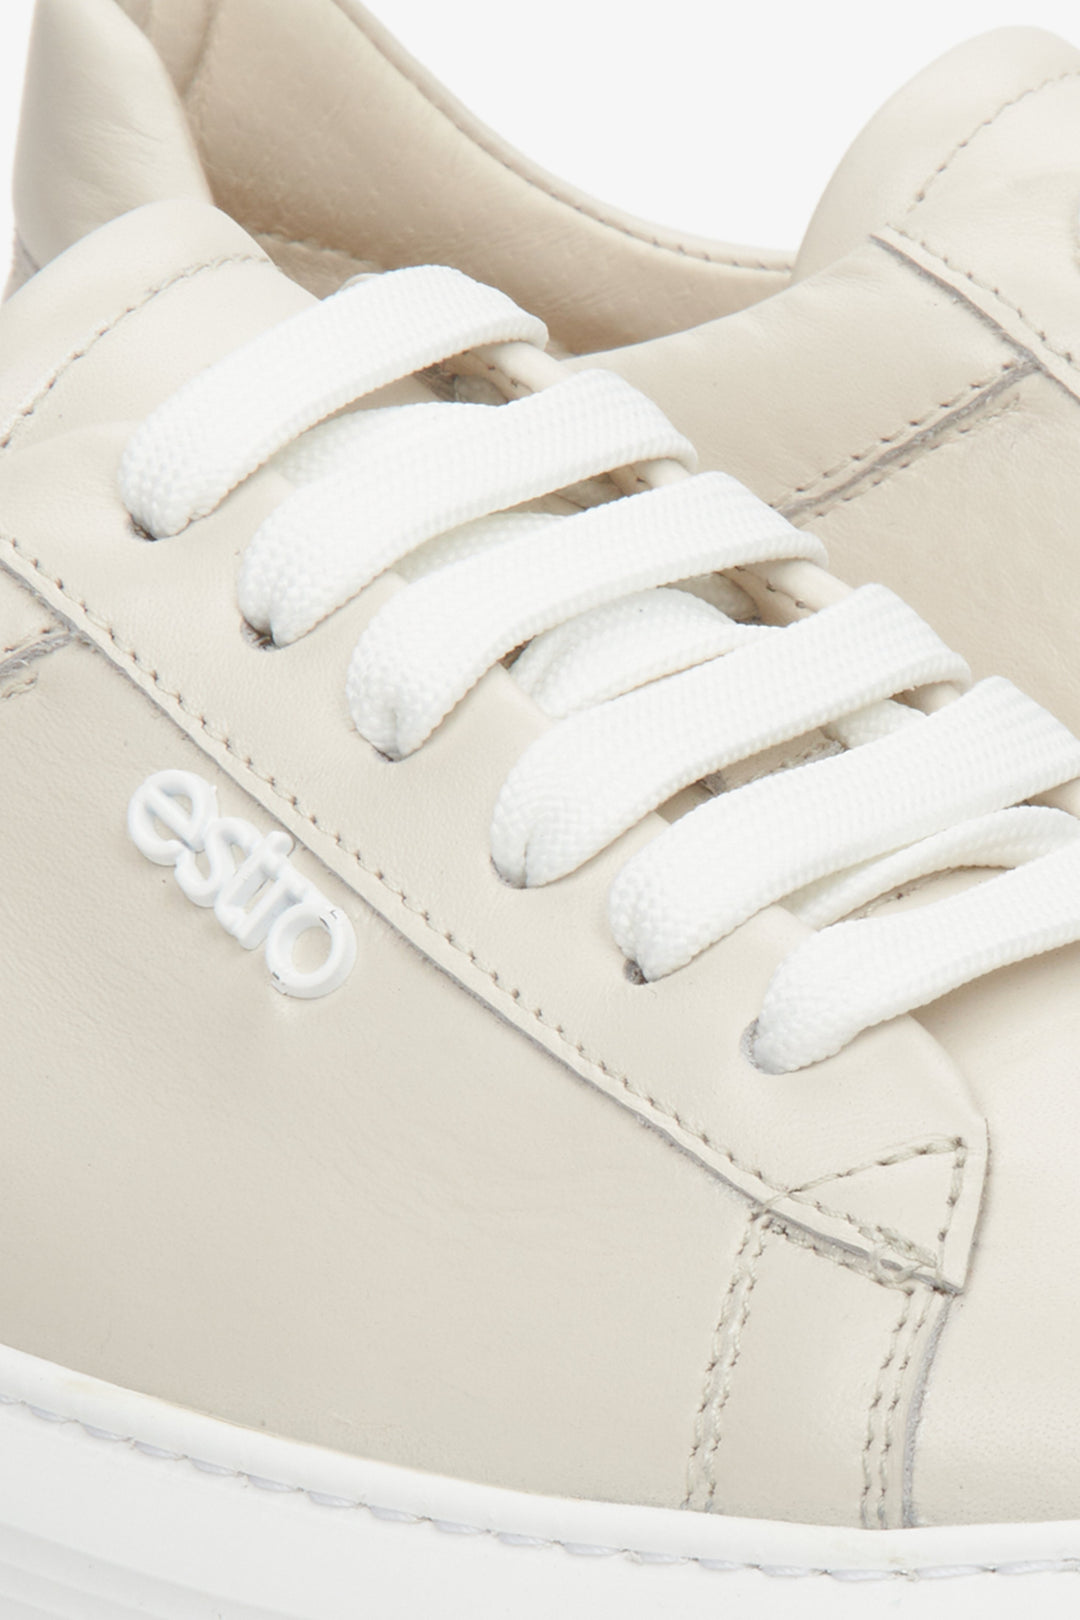 Women's light beige leather sneakers by Estro with laces - close-up on the details.